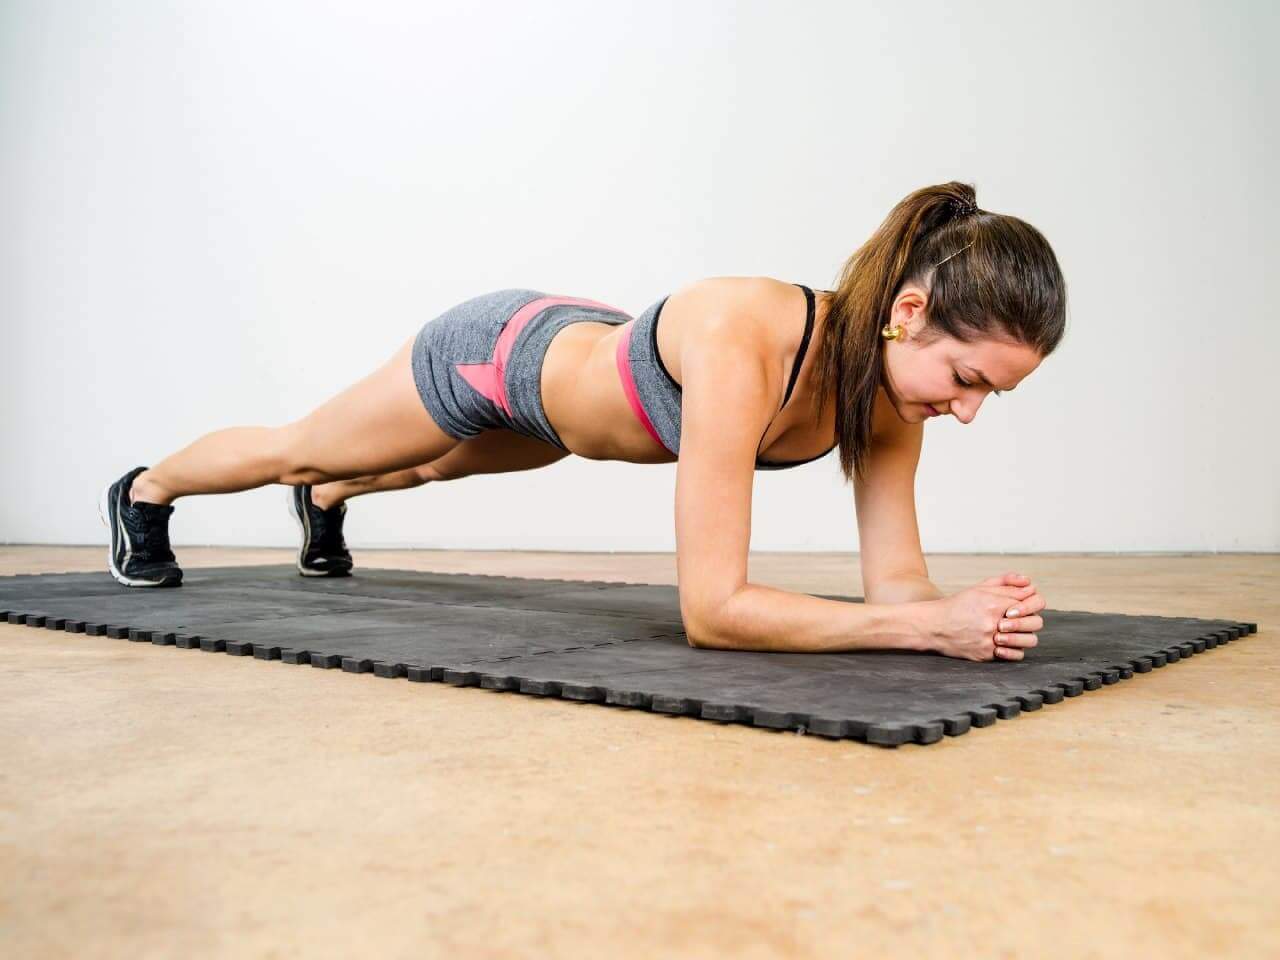 Isometric exercises are a type of strength training where the muscles are contracted without any movement of the joints. These exercises help build strength and endurance. Some examples of isometric exercises include planks, wall sits, and static holds.